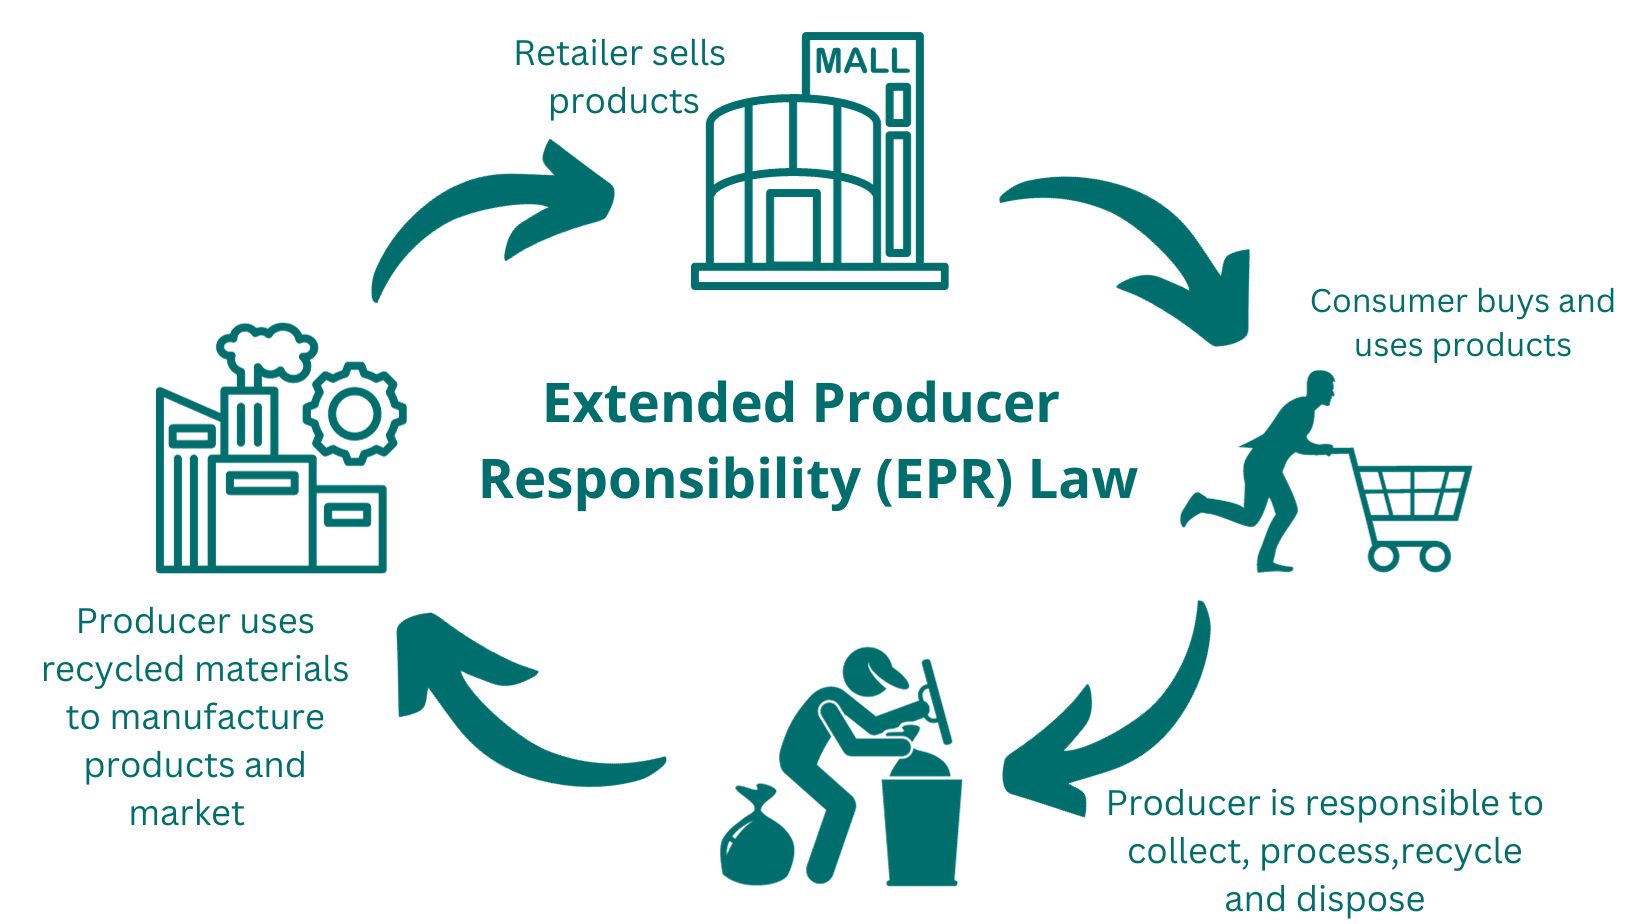 Extended Producer Responsibility (EPR) Law in the Philippines circular economy sustainability Production Process in Restore Circular economy recycling mechanical recycling sustainability linear economy Extended Producer Responsibility (EPR)